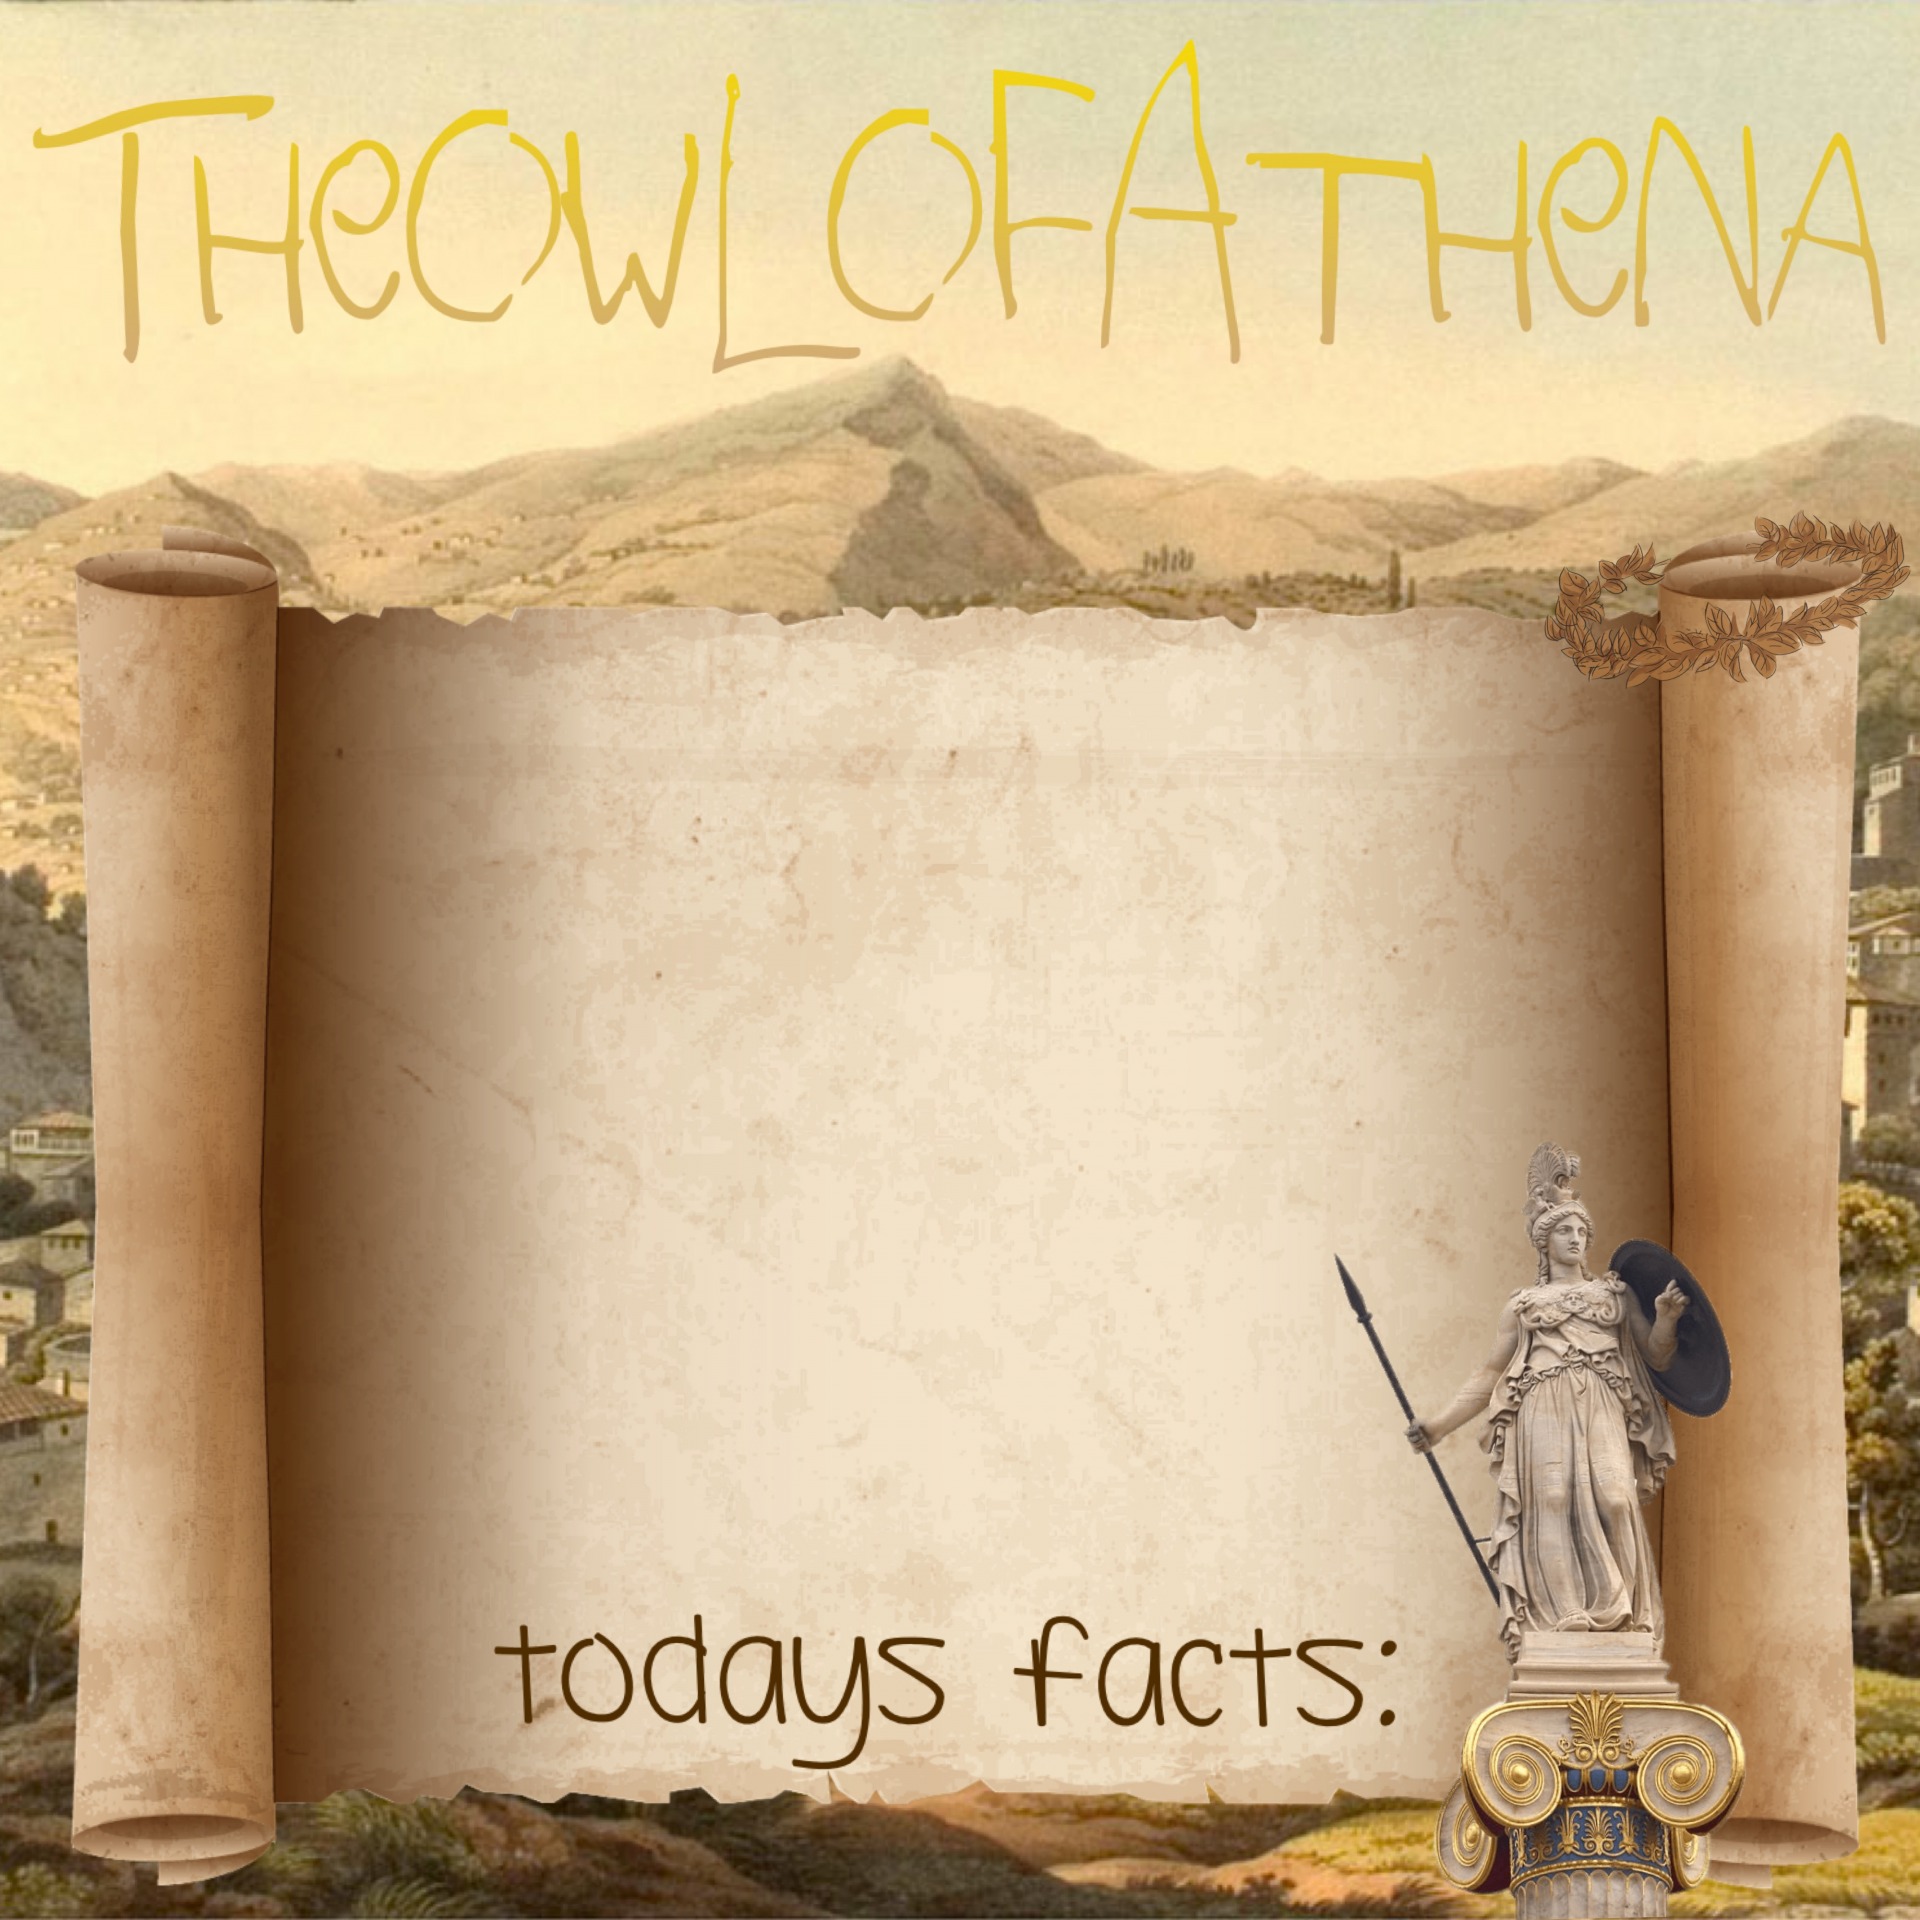 High Quality TheOwlOfAthena’s crappy facts Blank Meme Template